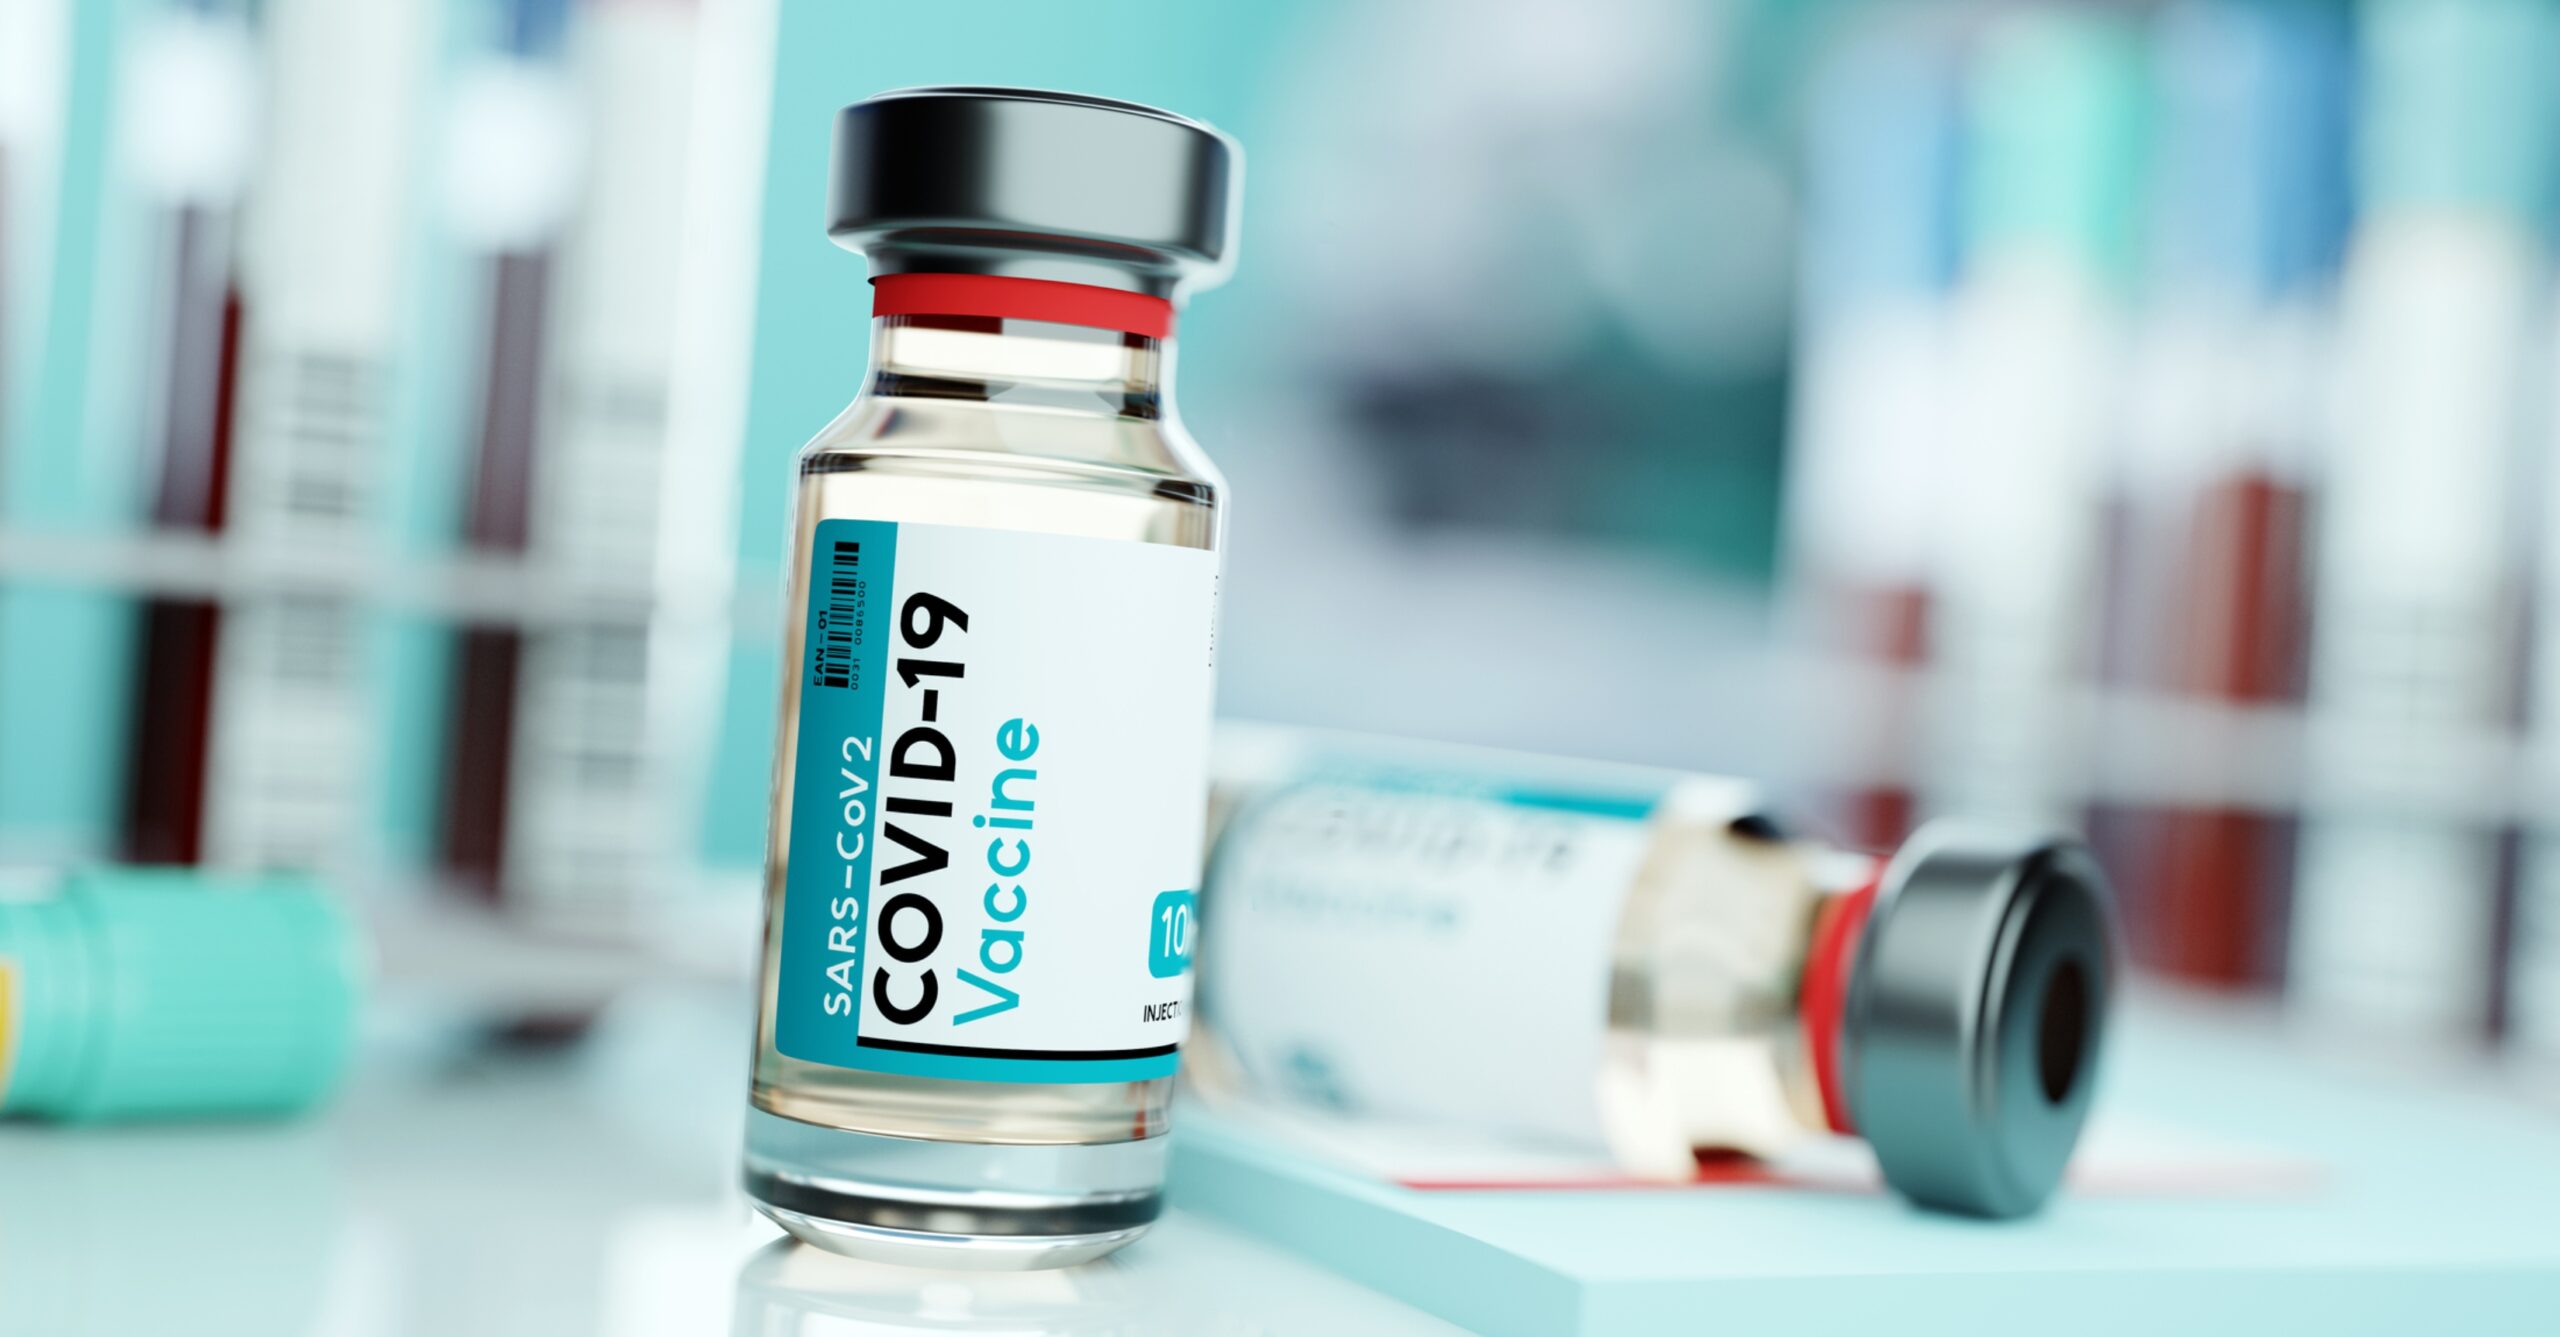 Vaccinators ‘should encourage’ high-risk groups to have Covid jab